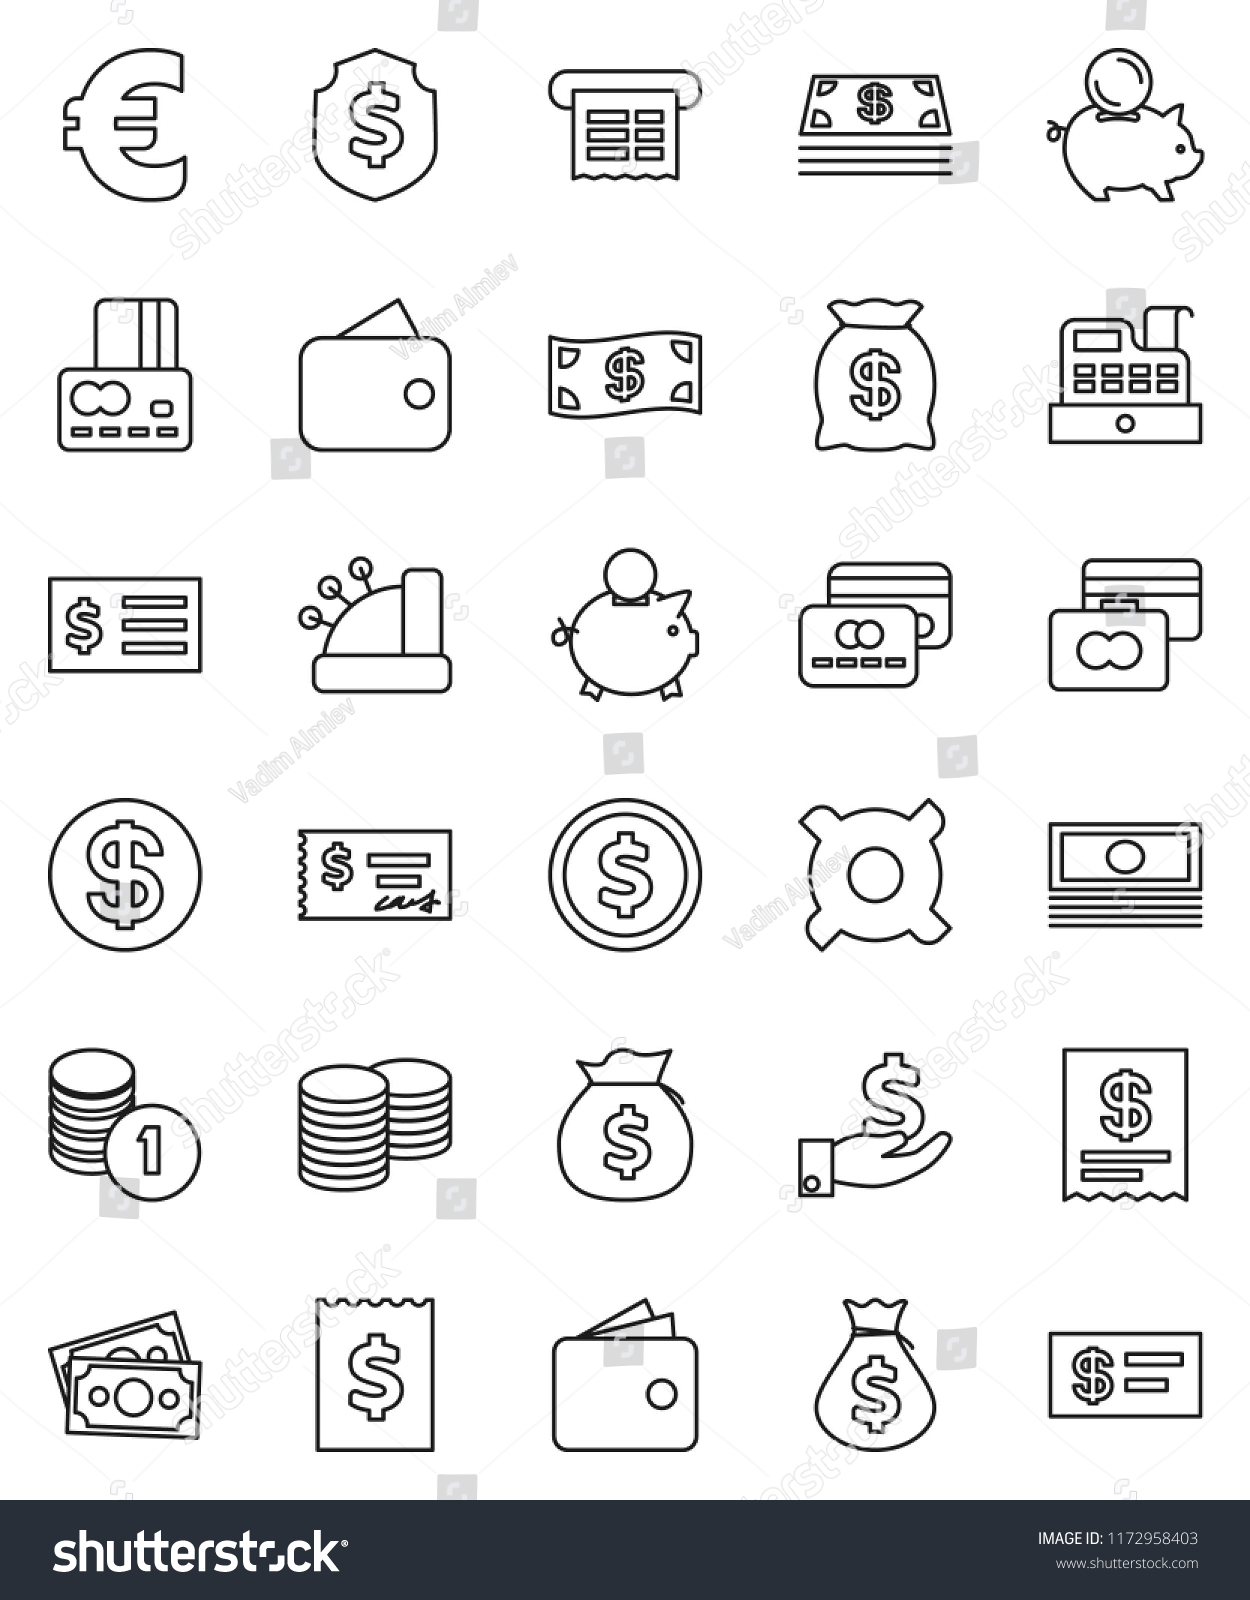 thin line vector icon set - dollar coin vector, credit card, wallet, cash, money bag, piggy bank, investment, stack, check, receipt, shield, any currency, euro sign, cashbox #1172958403